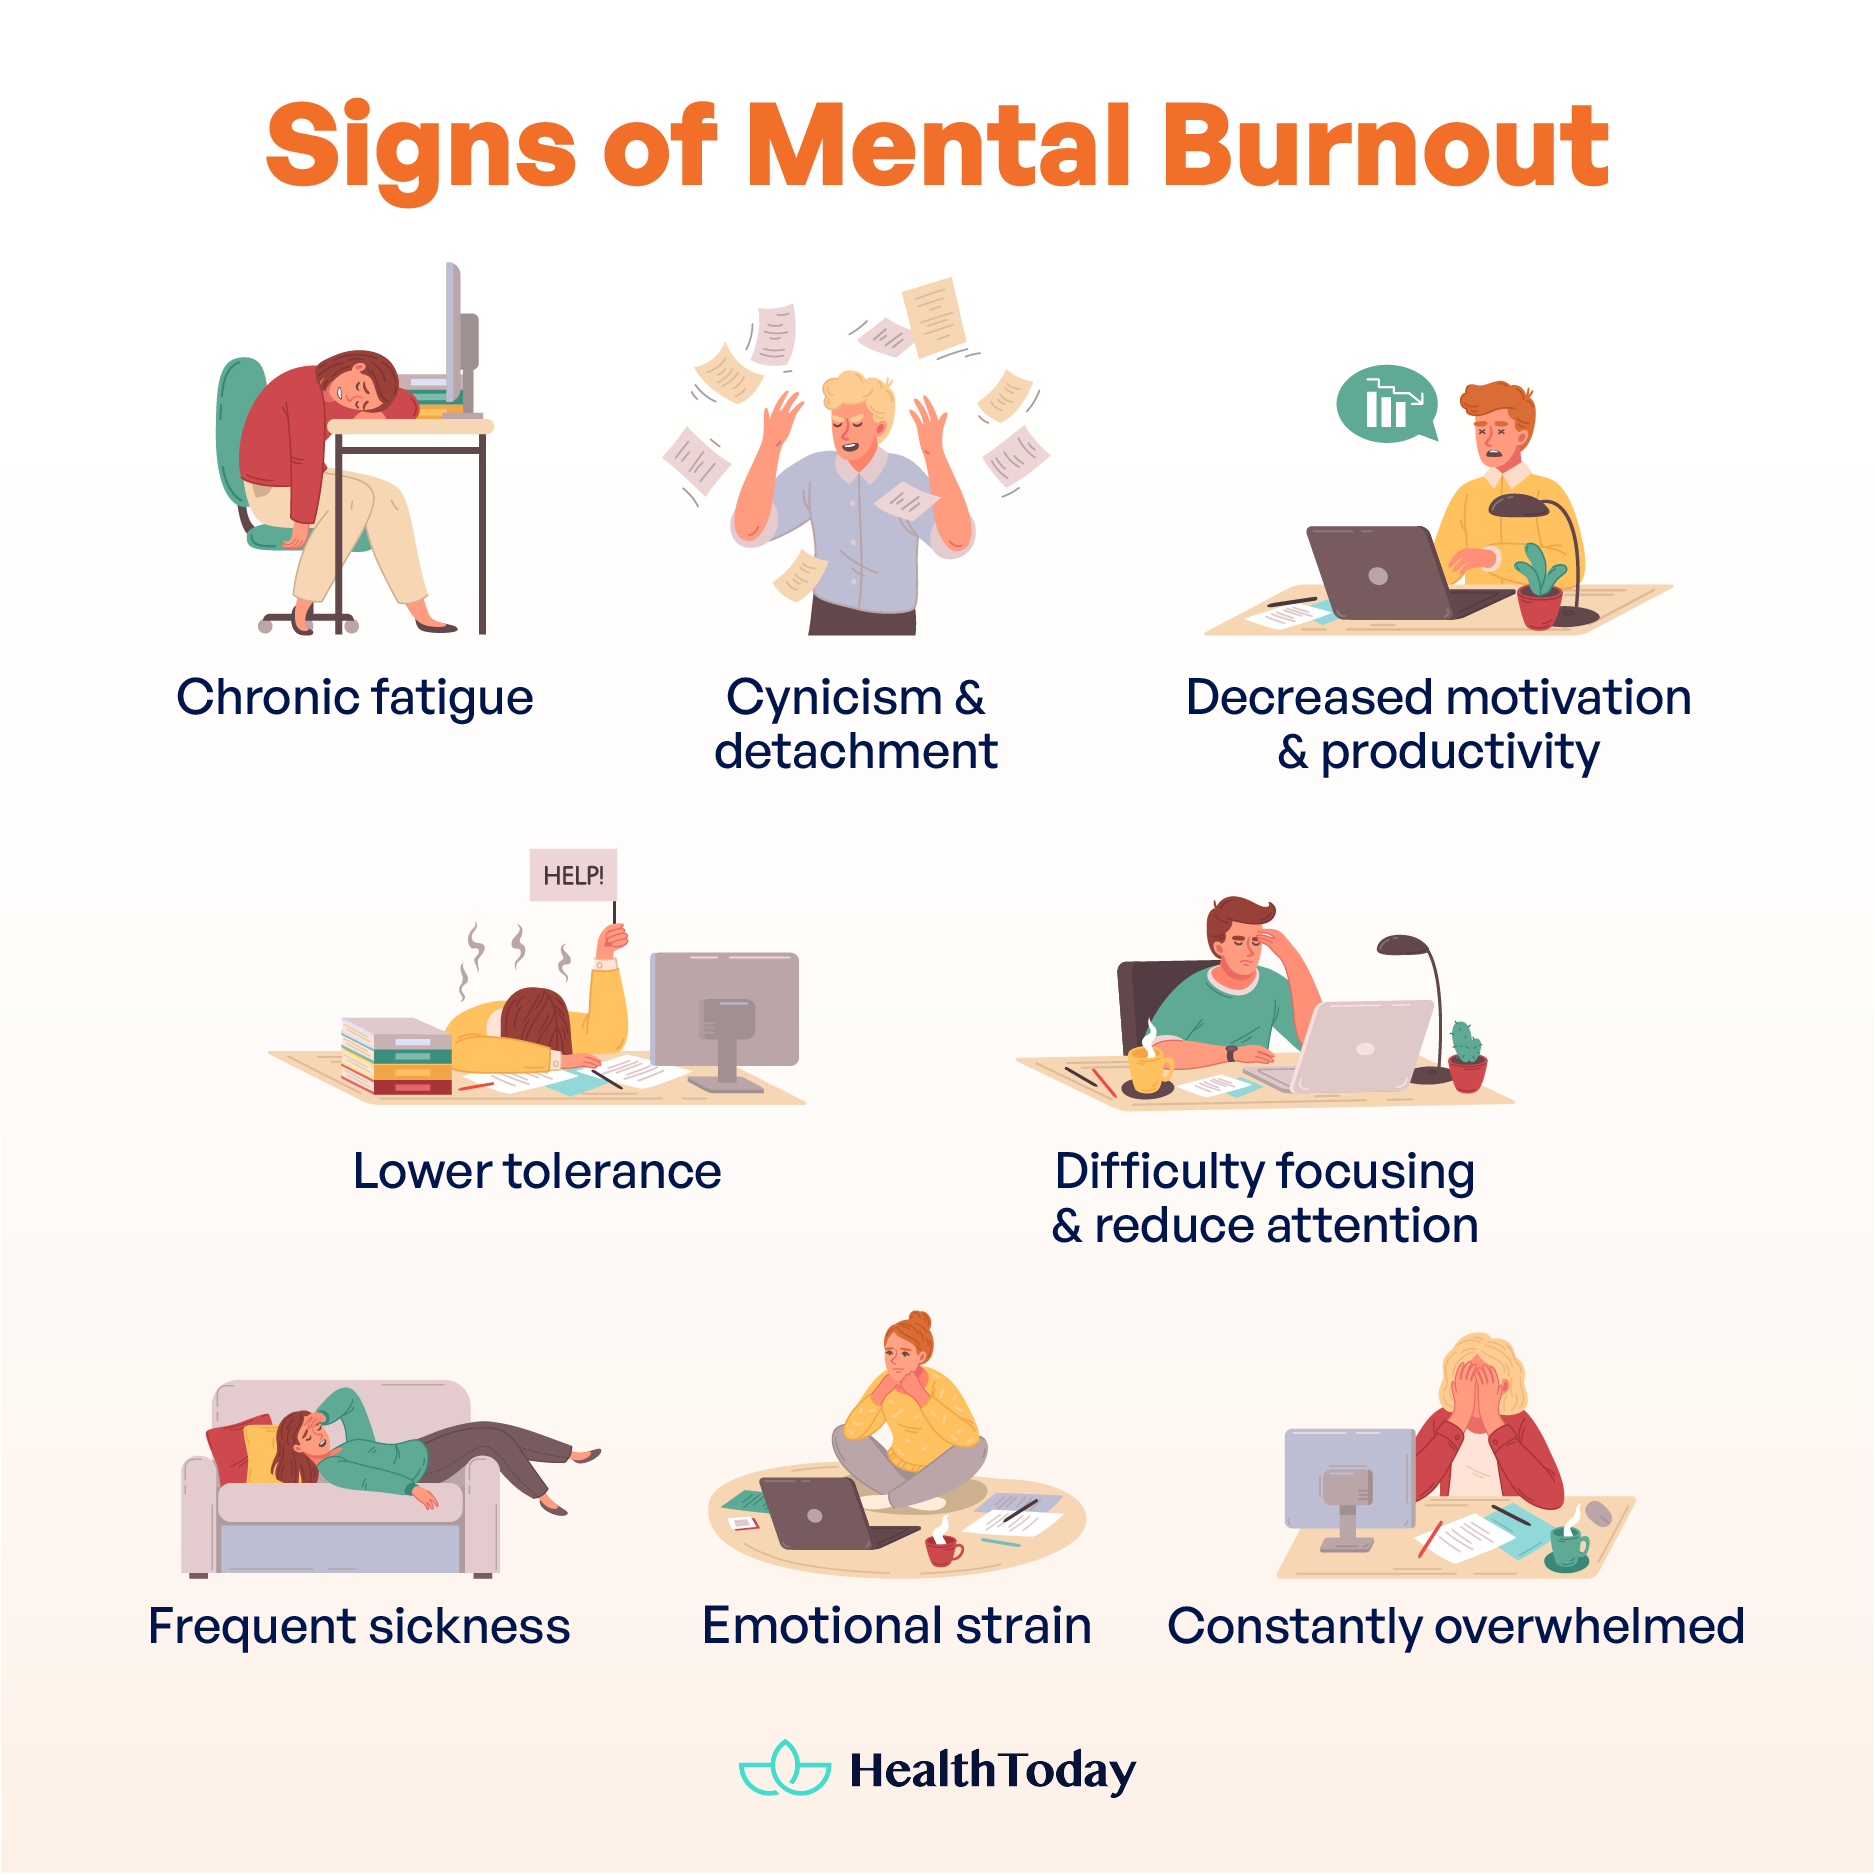 How To Get Over Burnout Signs and Natural Ways To Heal 02